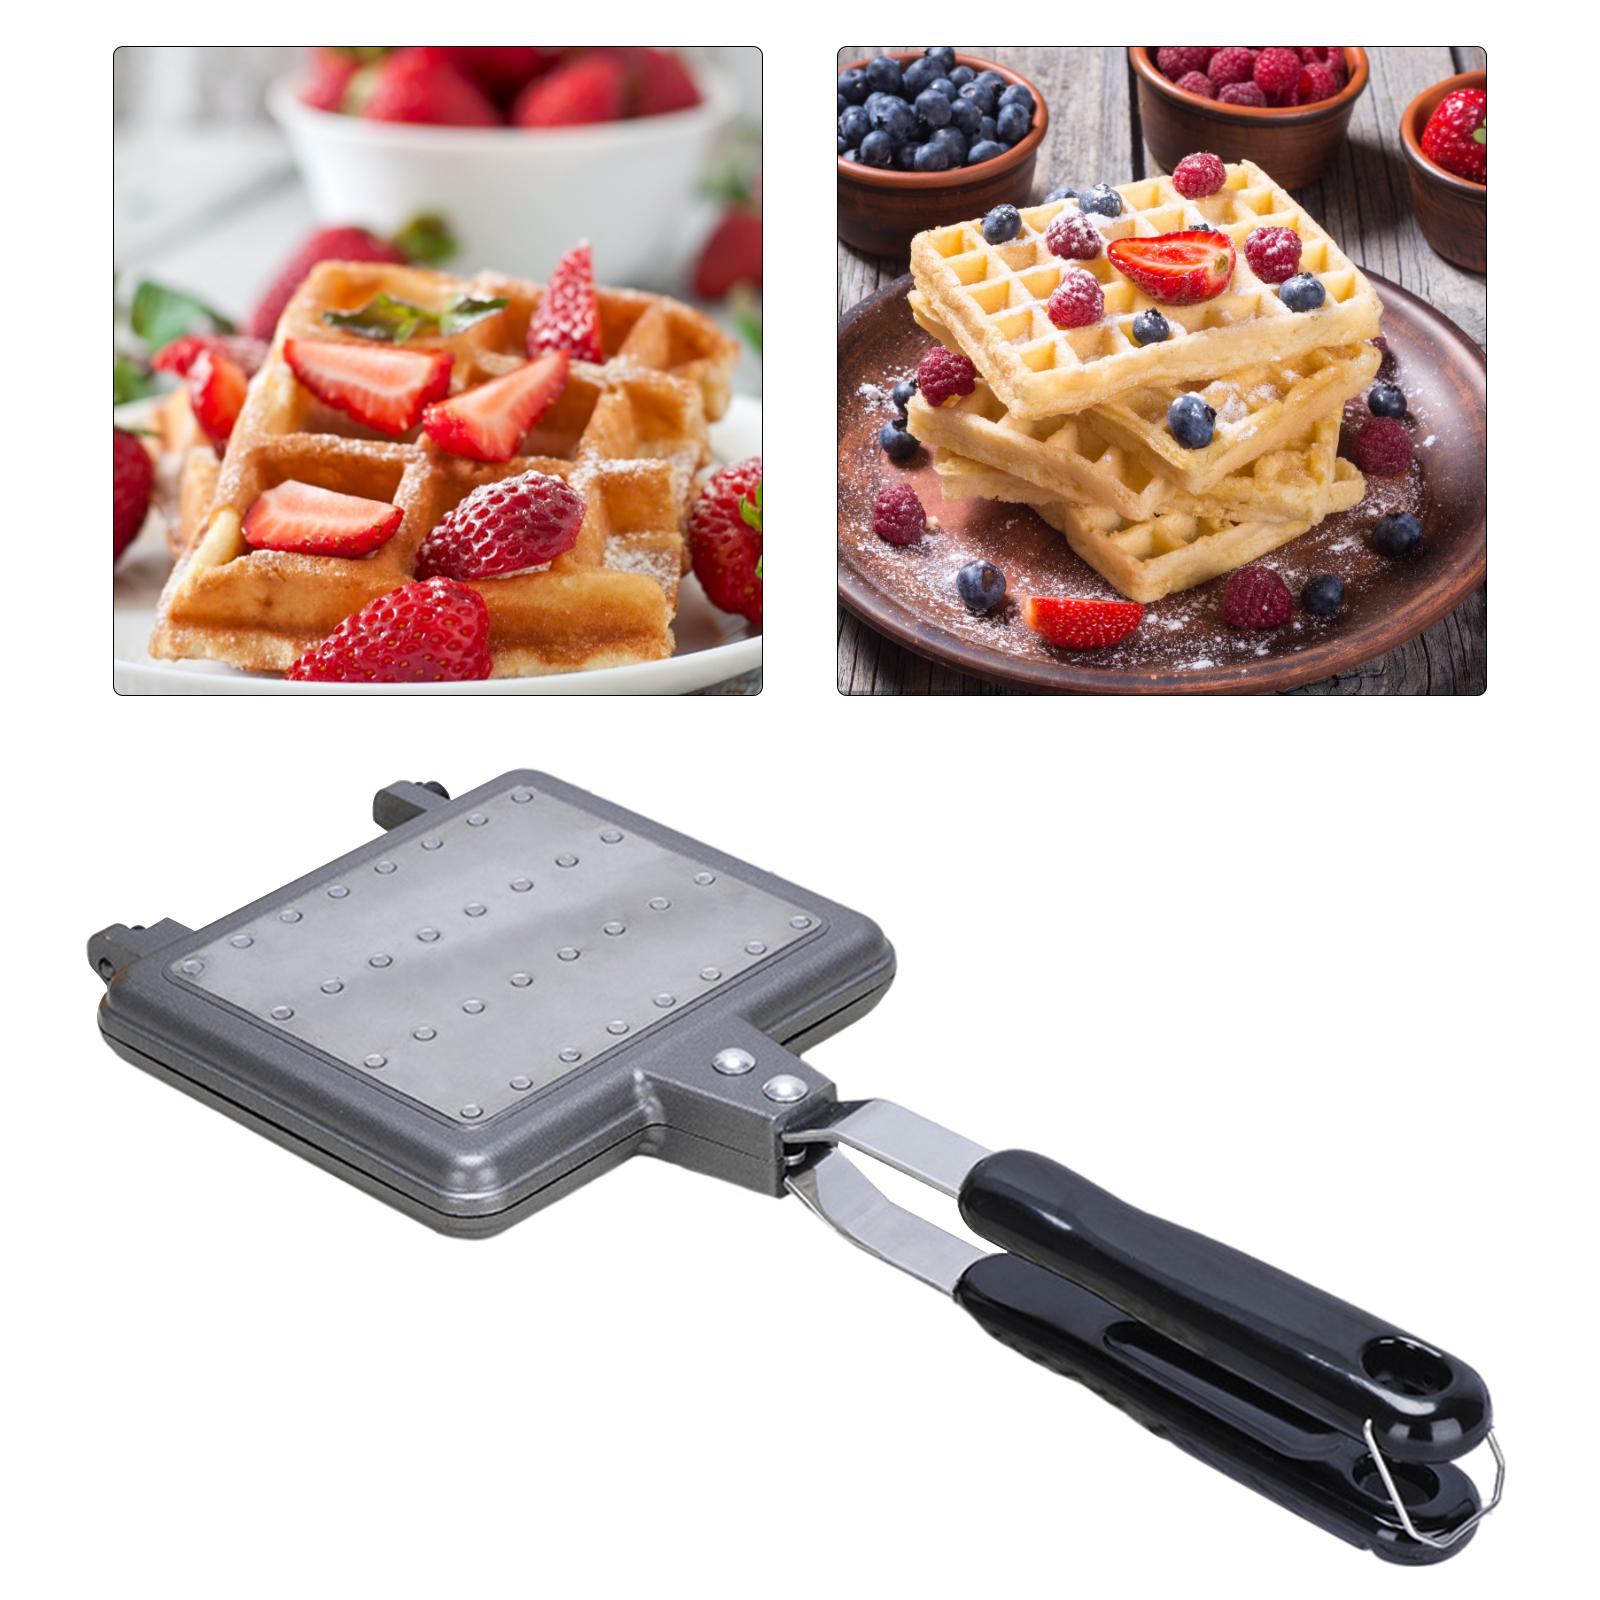 Waffle Maker Mold Baking Tools Mould Press Plate for Home Kitchenware Snacks